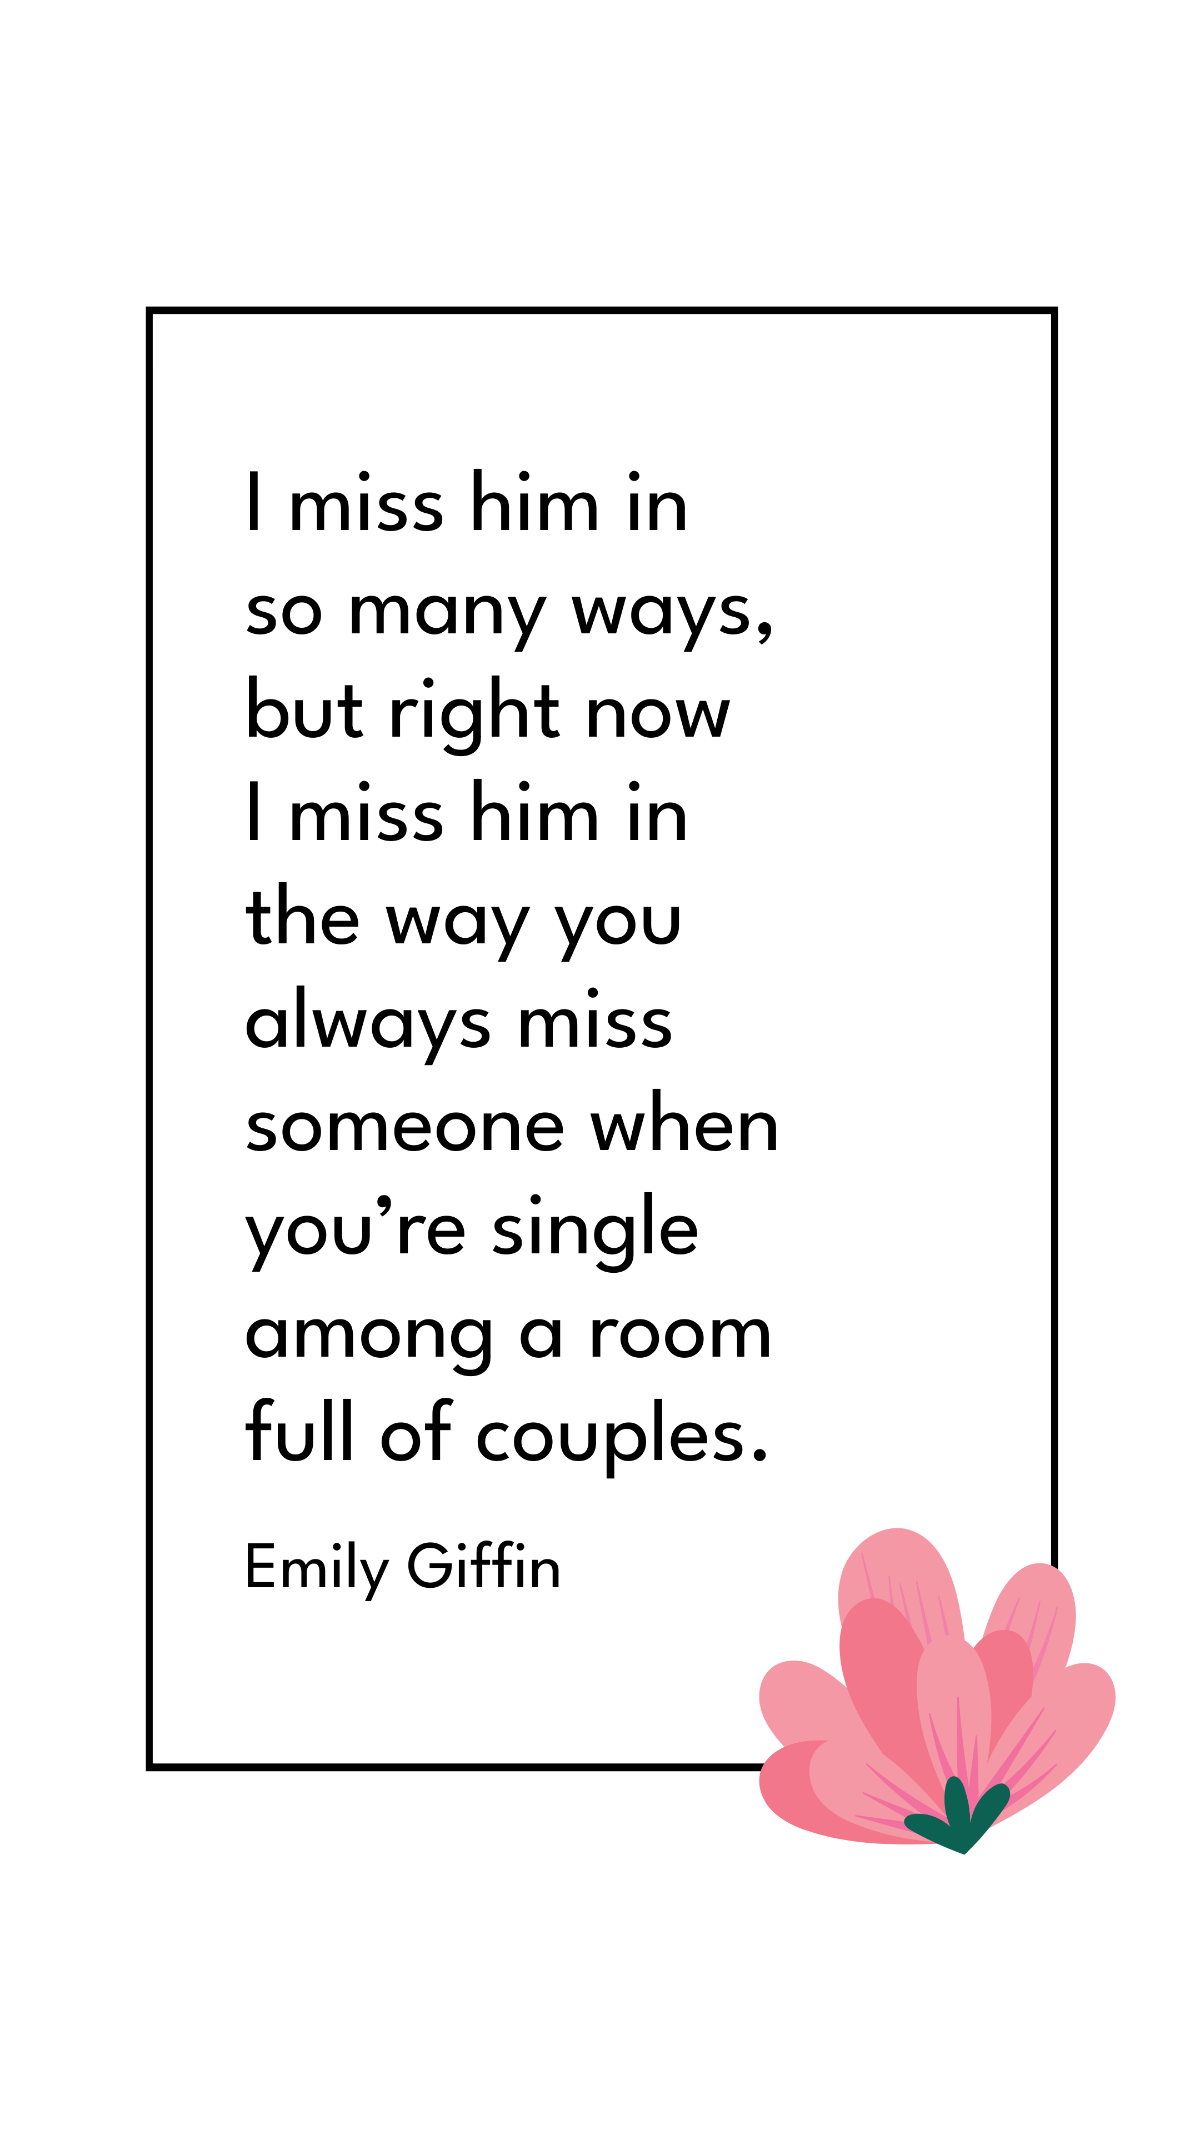 Emily Giffin - I miss him in so many ways, but right now I miss him in the way you always miss someone when you’re single among a room full of couples. Template